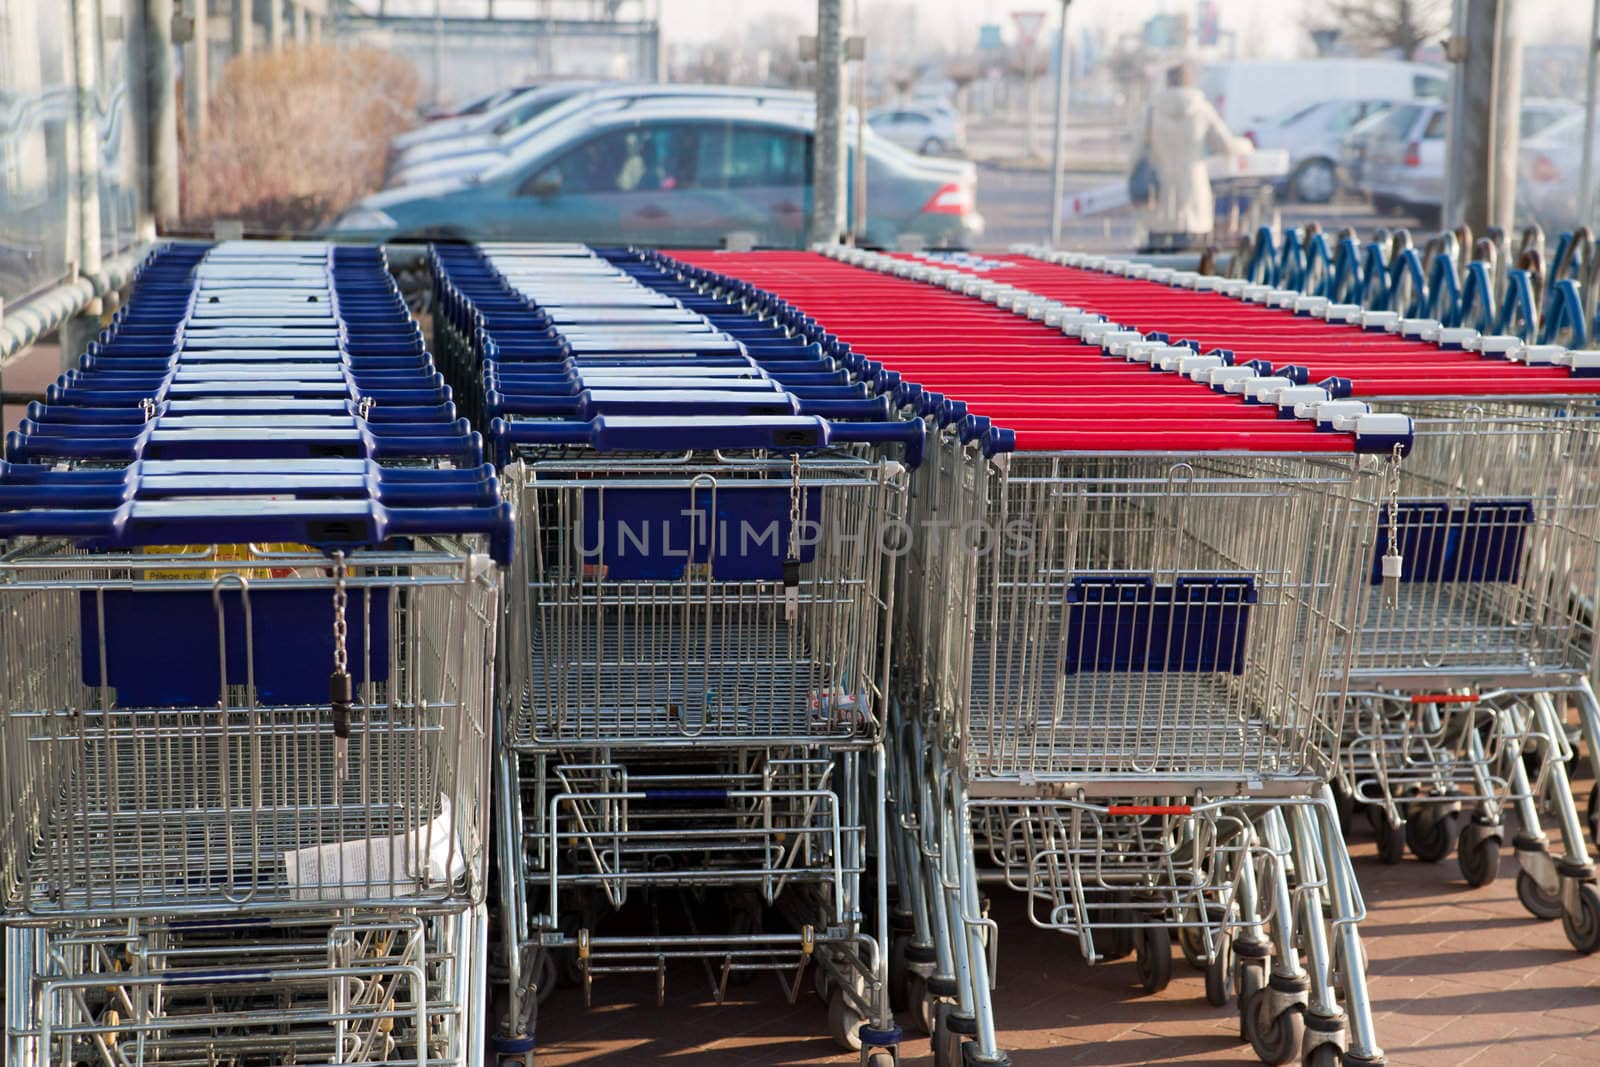 Row of empty shopping carts at the supermarket
